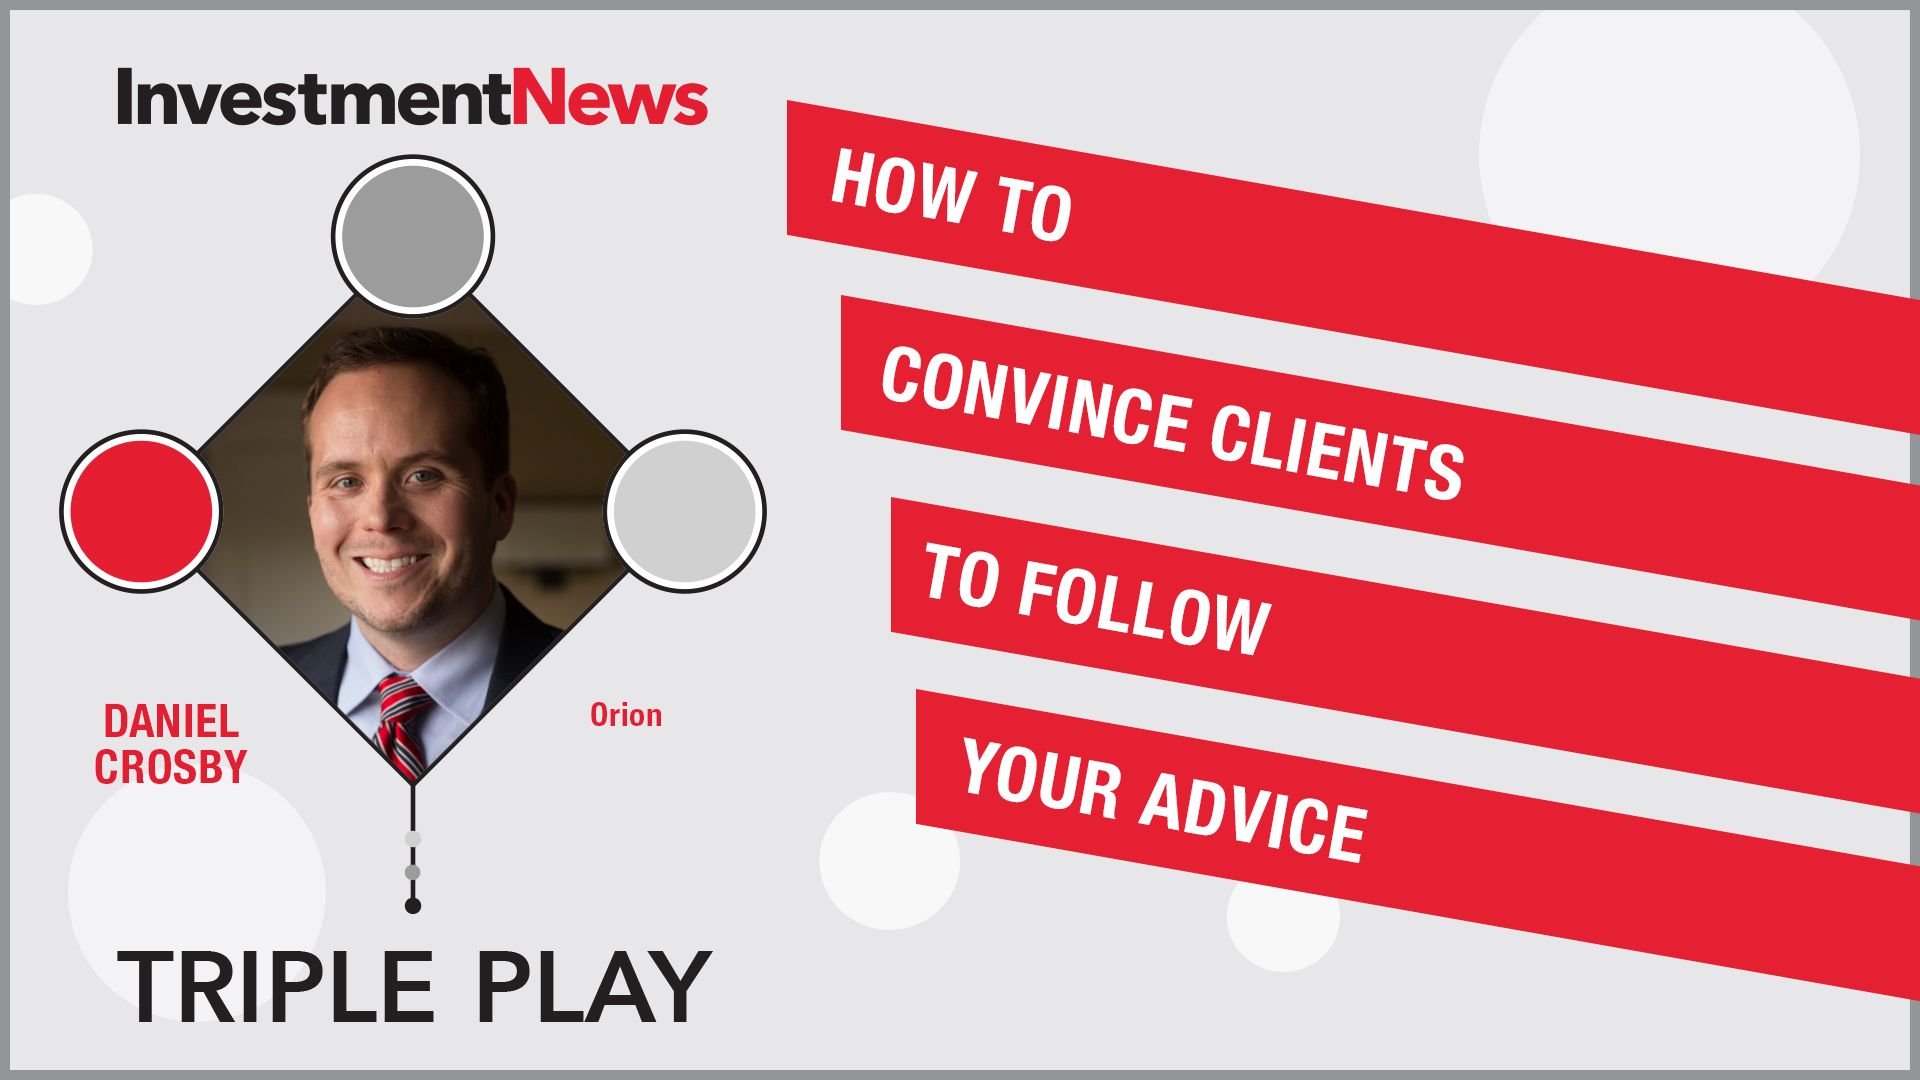 Dr. Daniel Crosby on how to convince clients to follow your advice